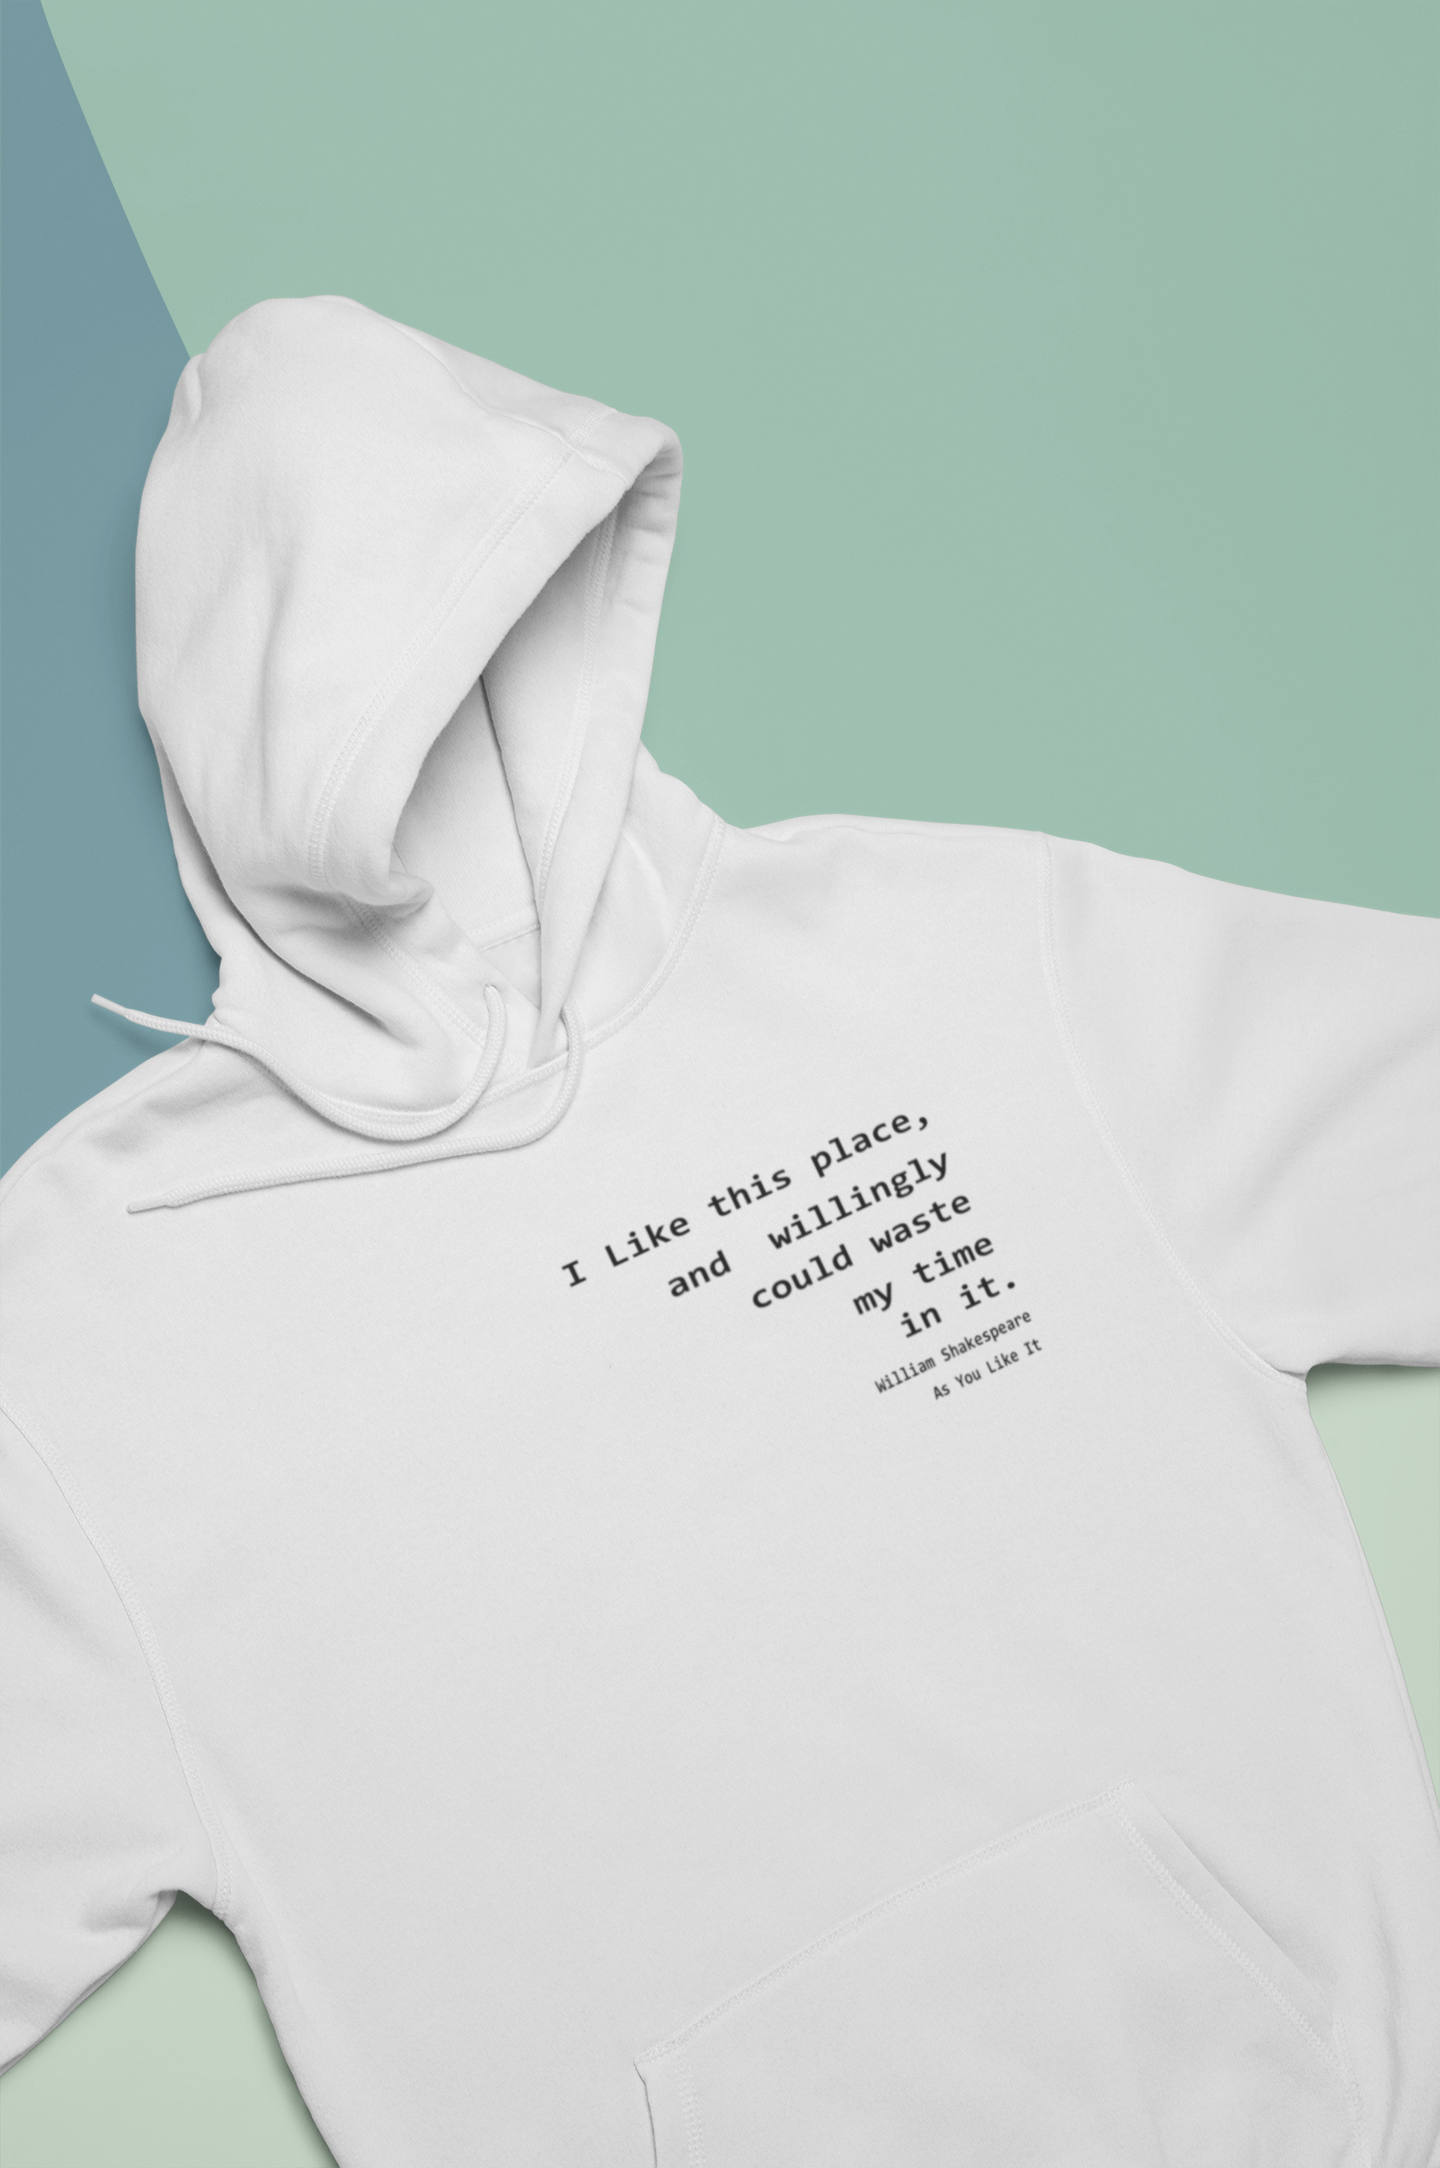 I Like This Place Quotes Hoodies for Women-FunkyTeesClub